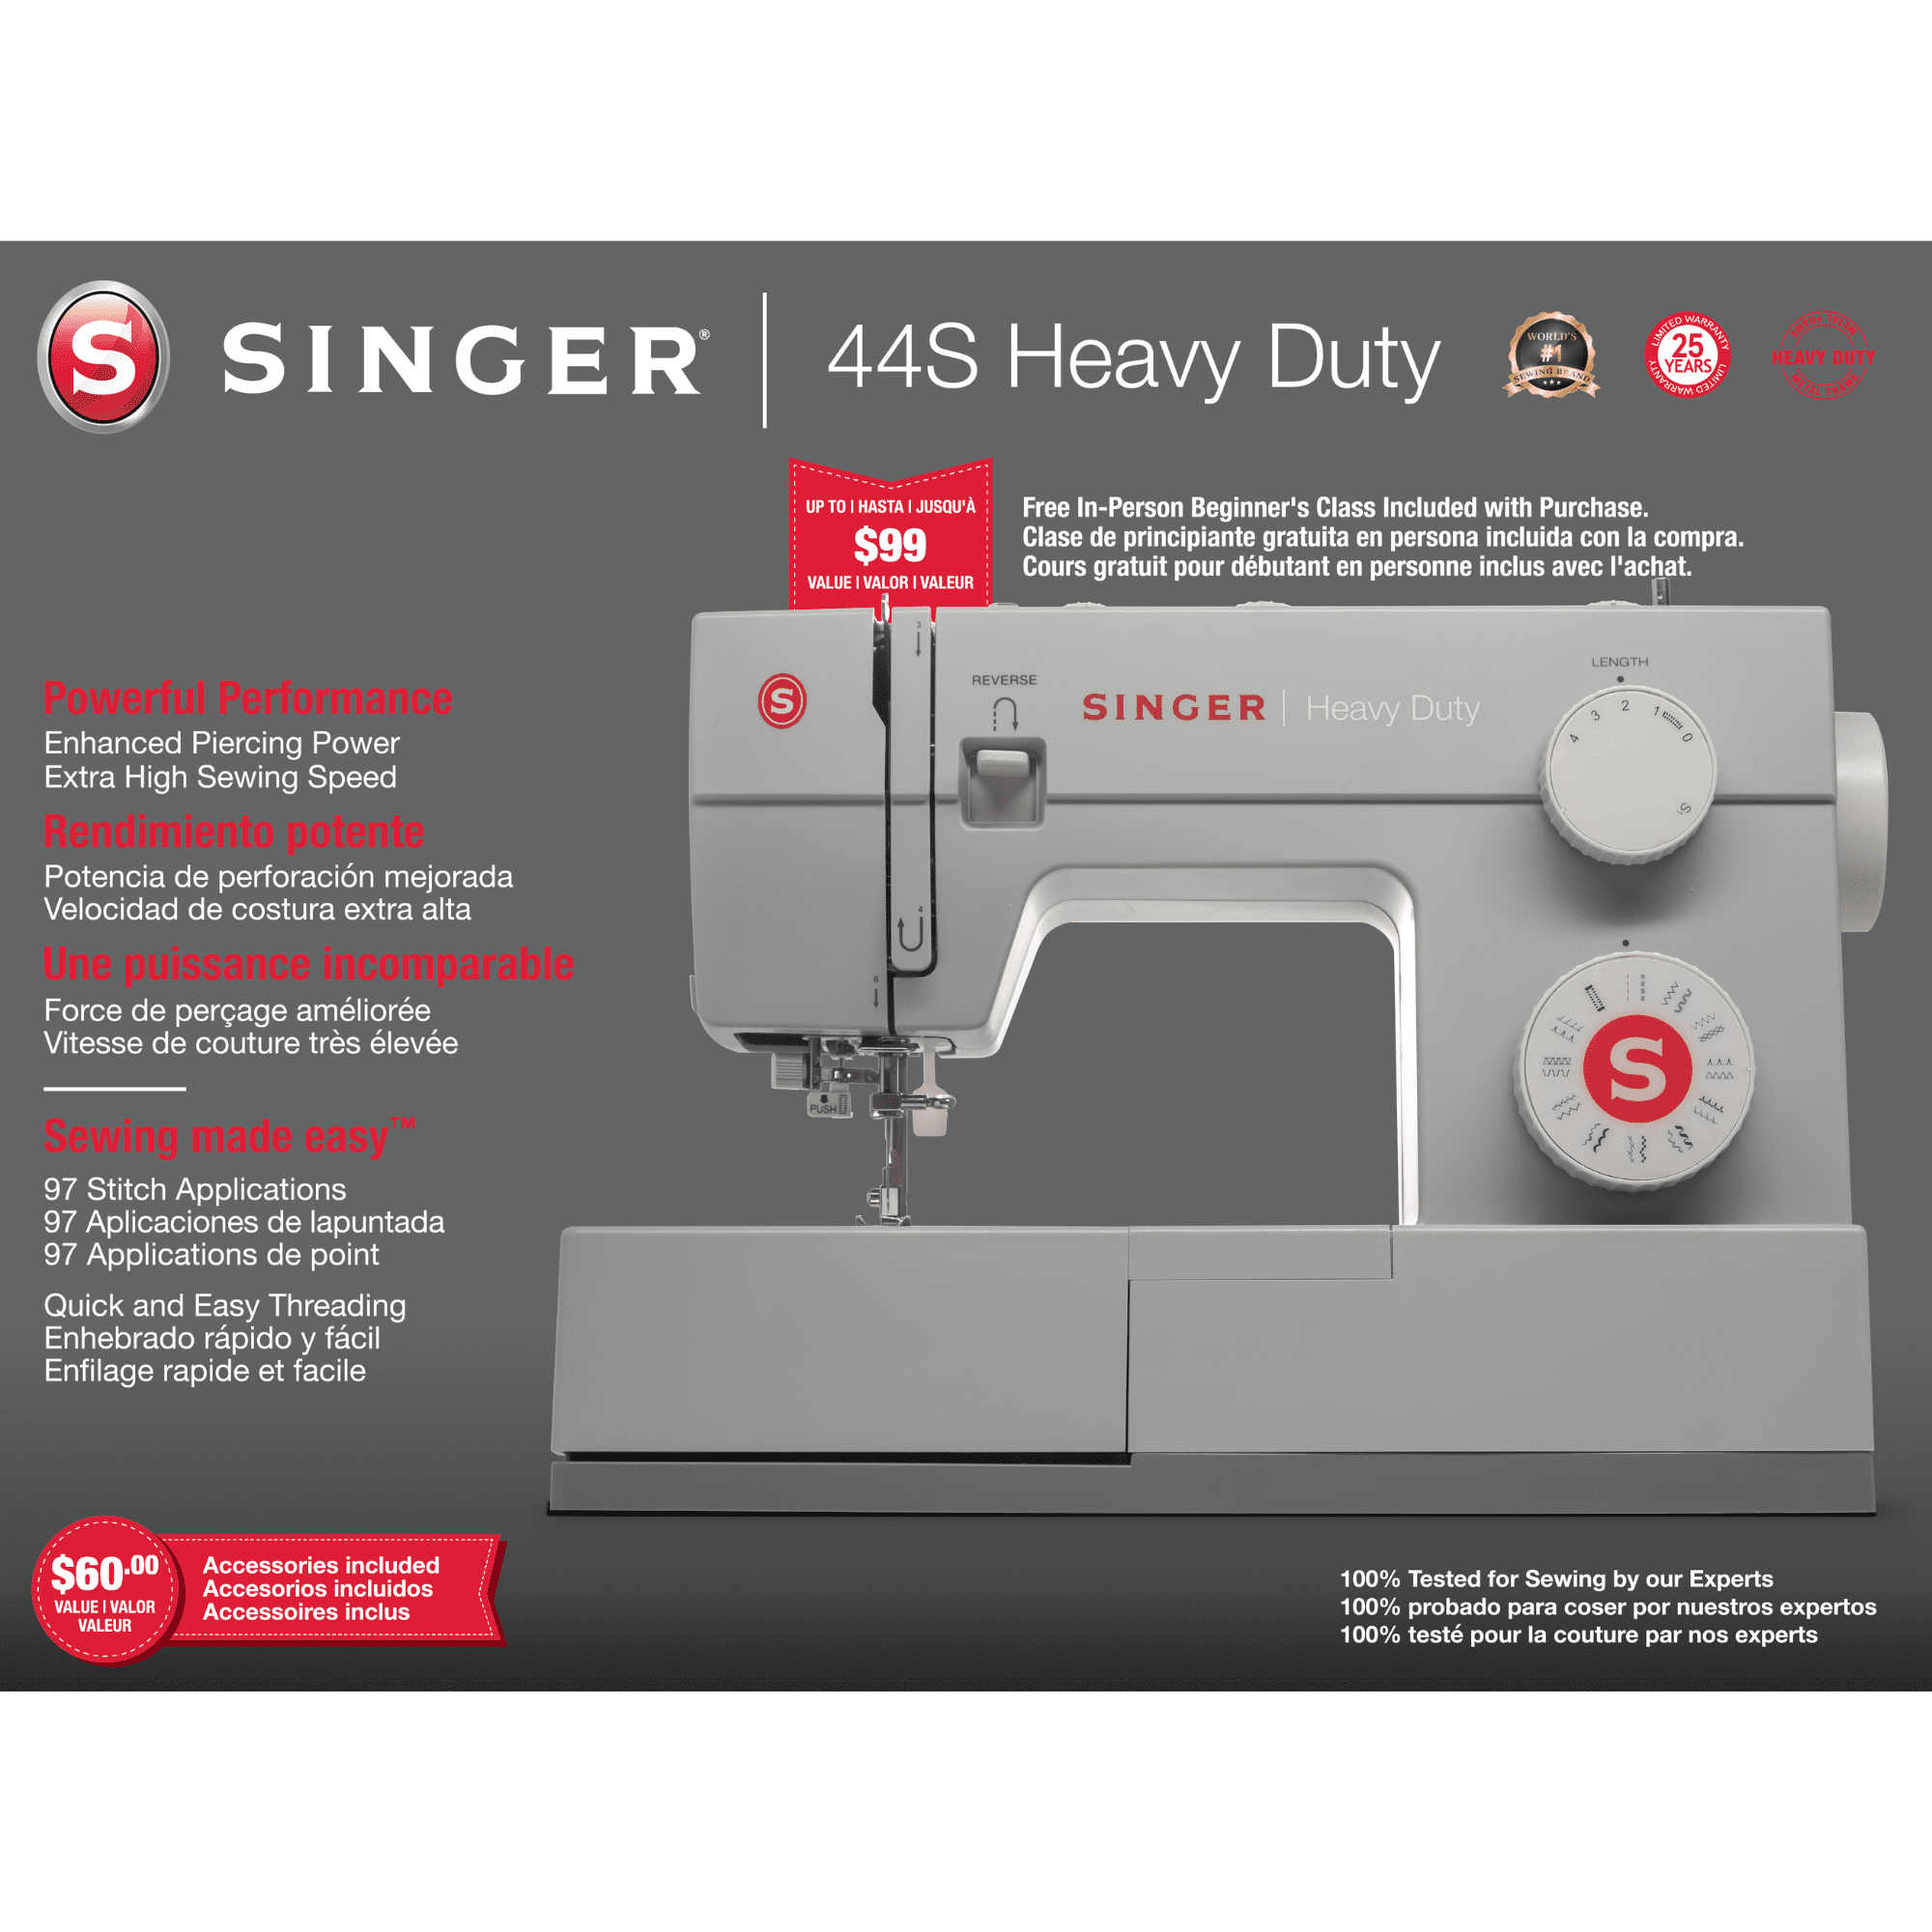 SINGER 44S Classic Heavy Duty Sewing Machine with 23 Built-In Stitches —